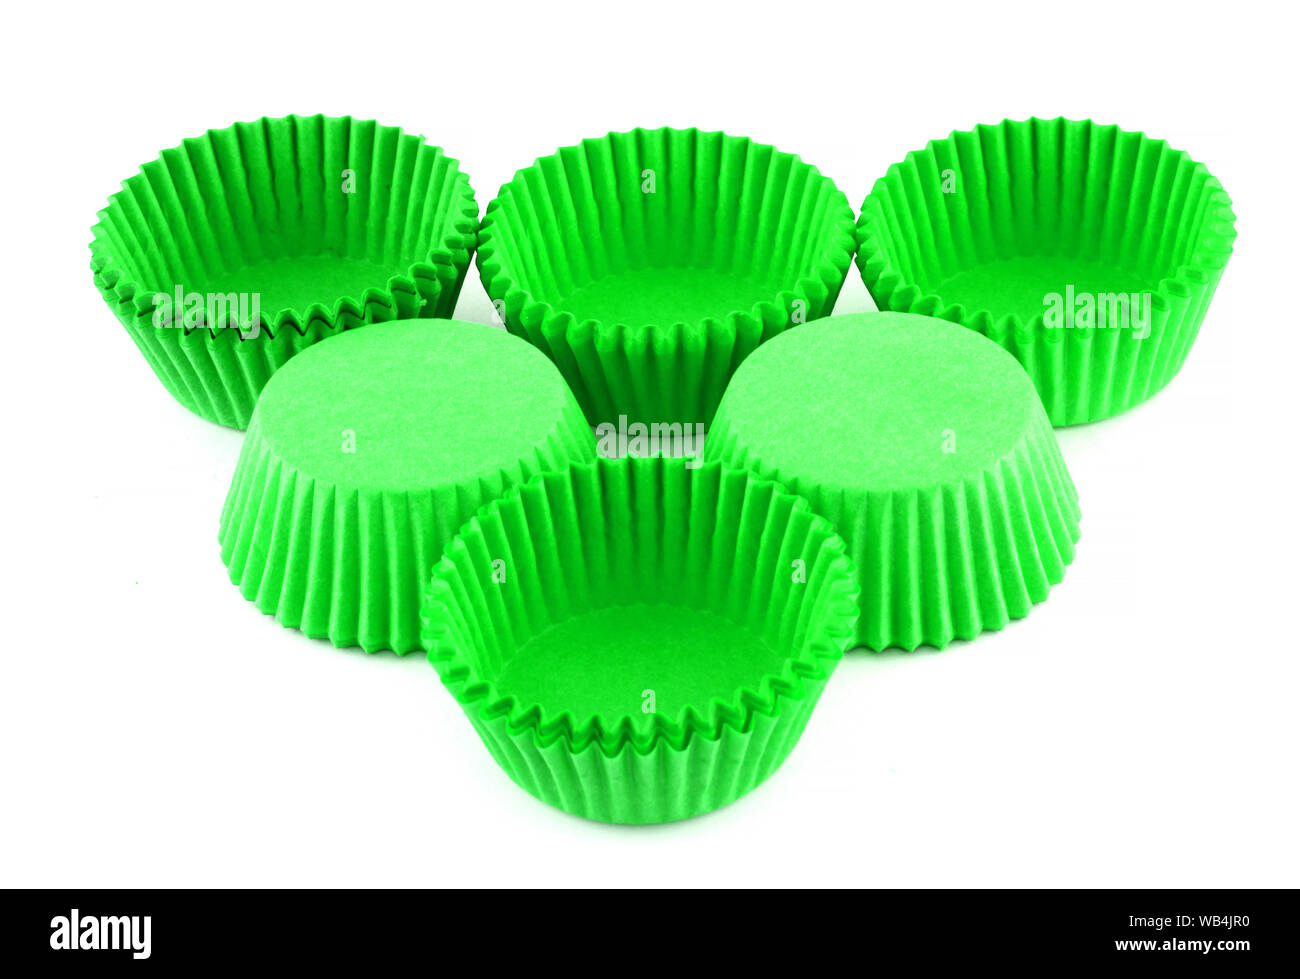 https://c8.alamy.com/comp/WB4JR0/green-silicone-form-for-cooking-muffin-and-cupcake-on-white-background-molds-for-sweet-and-delicious-muffins-WB4JR0.jpg